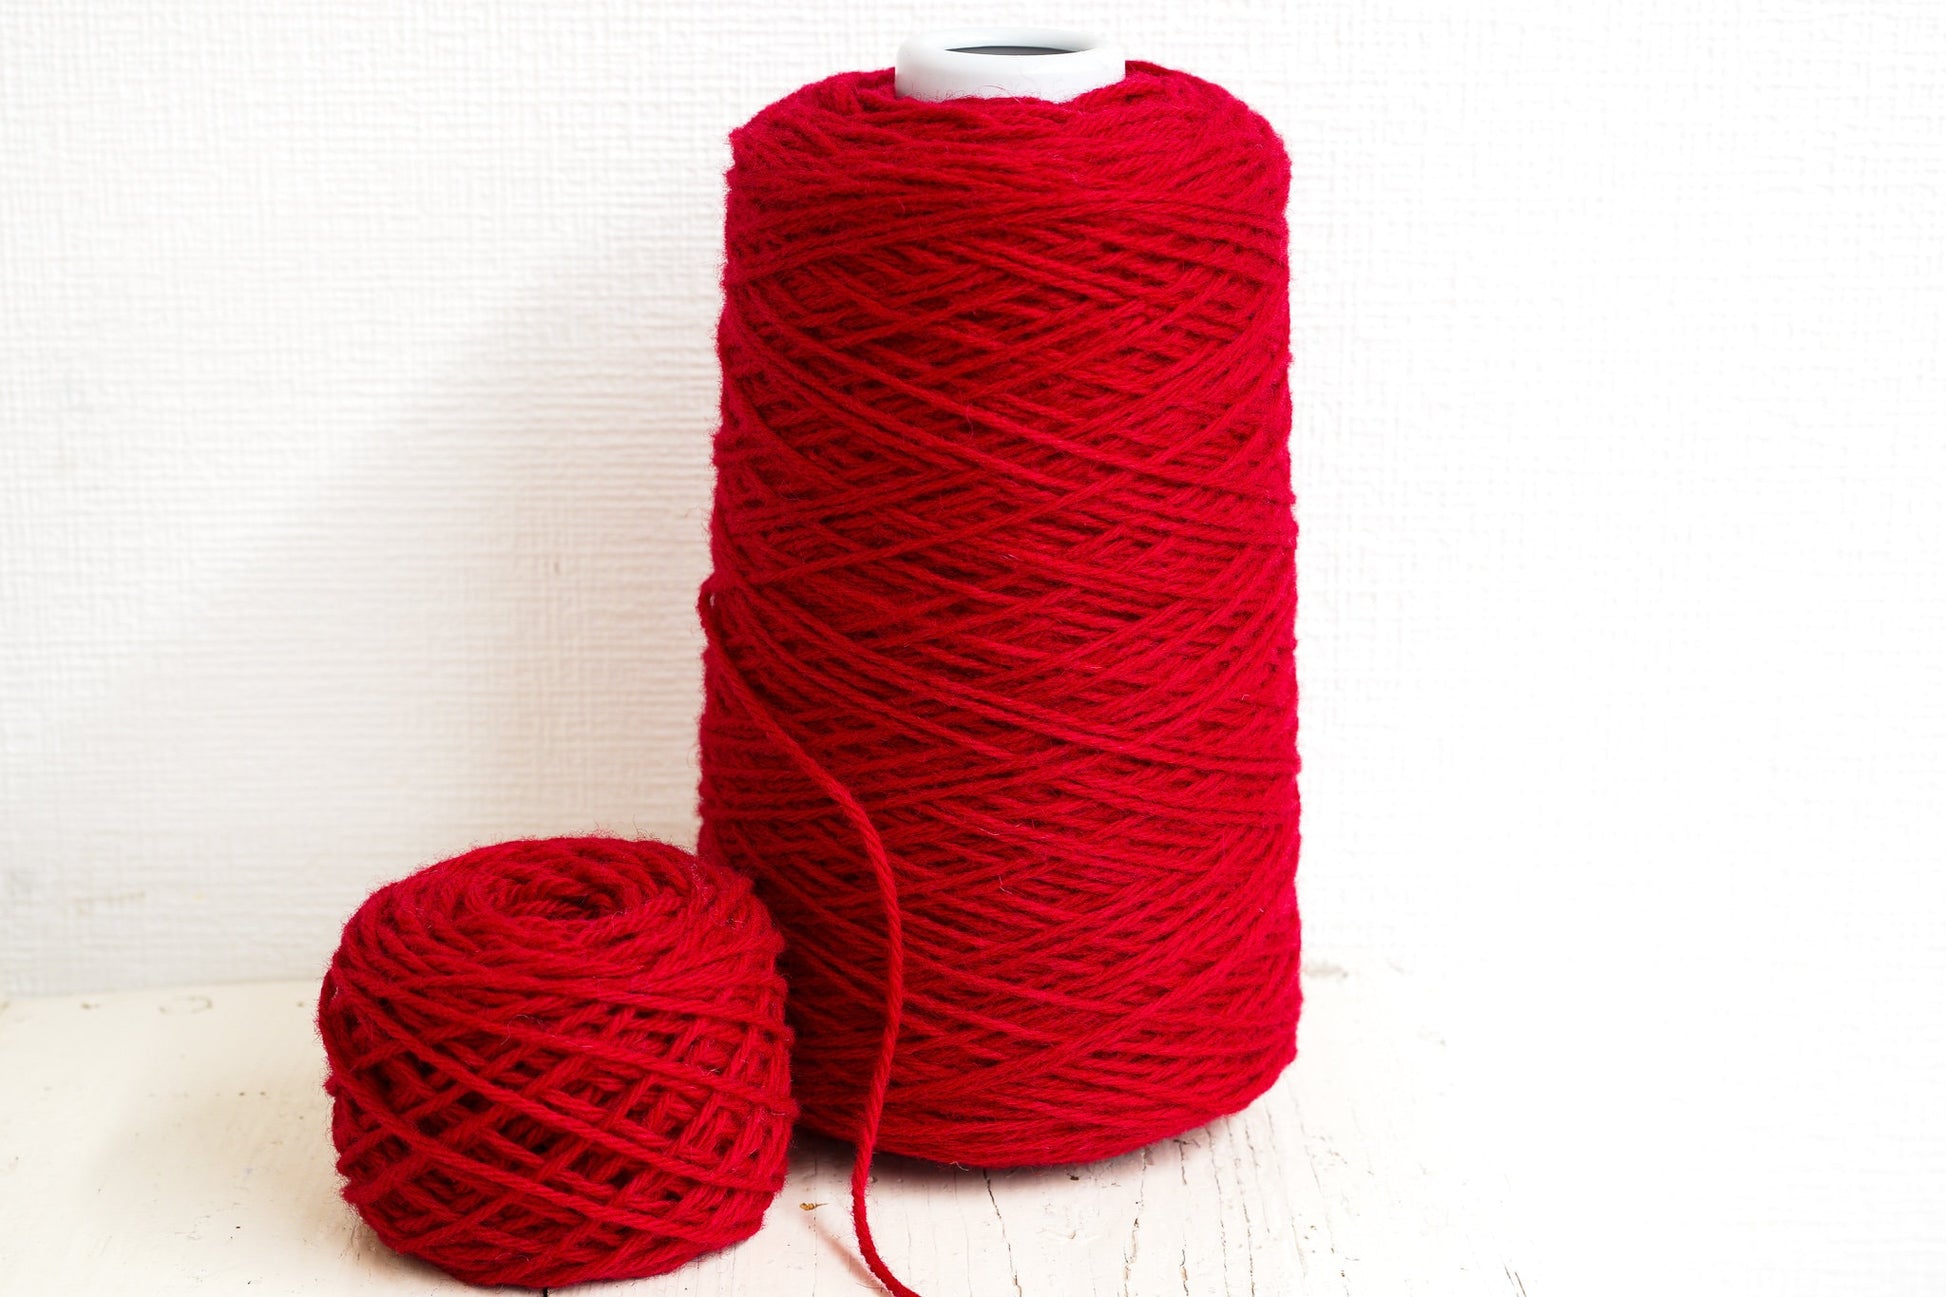 Bright red wool yarn in cones